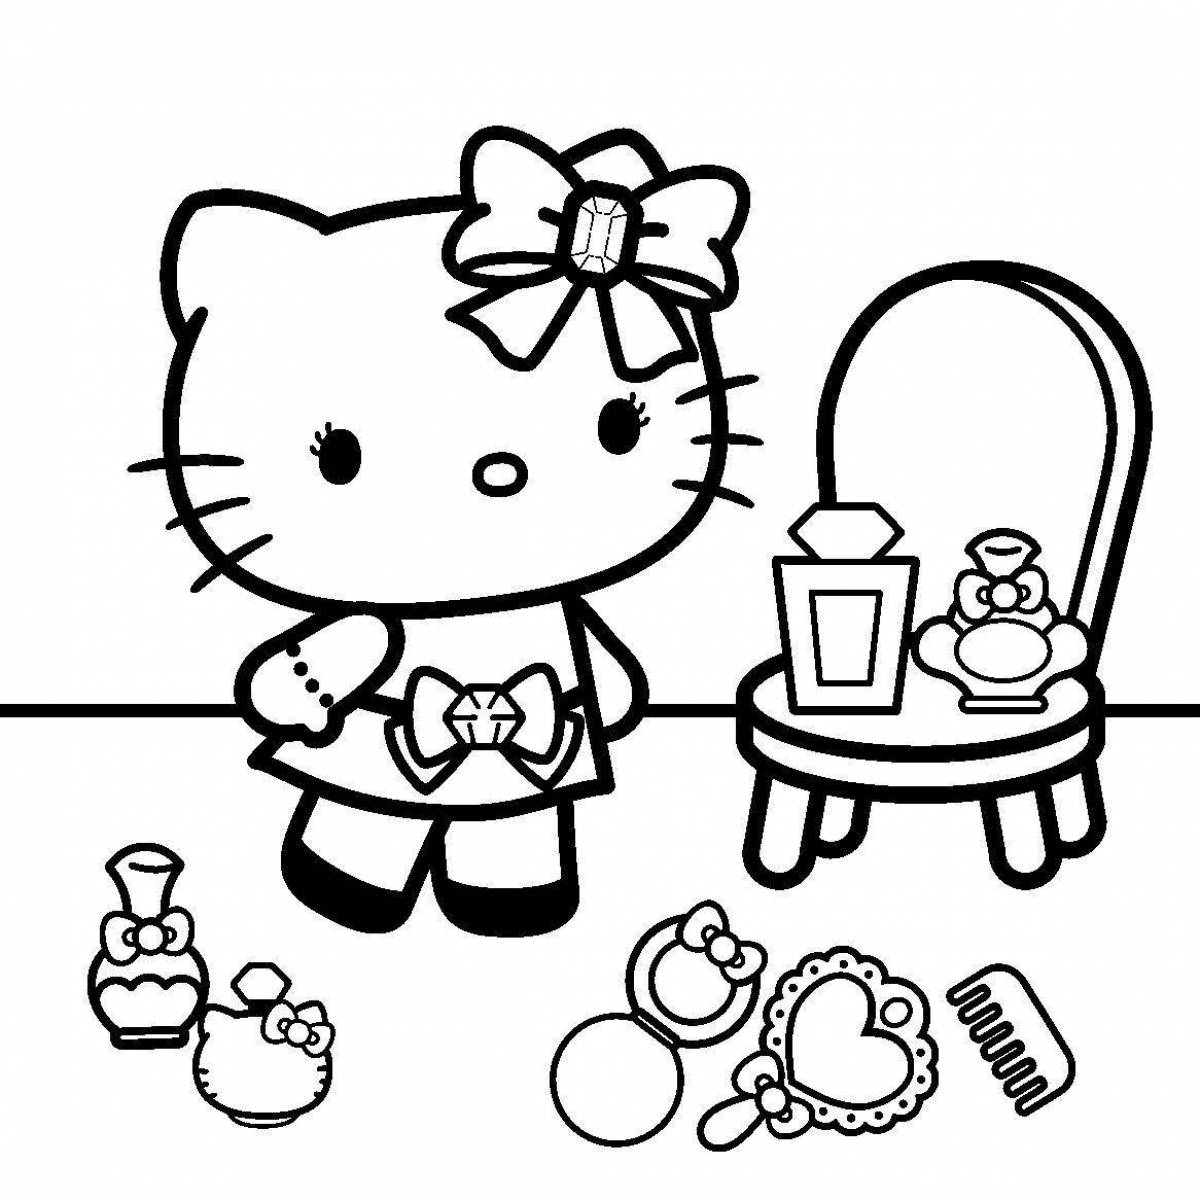 Cute hello kitty mermaid coloring page